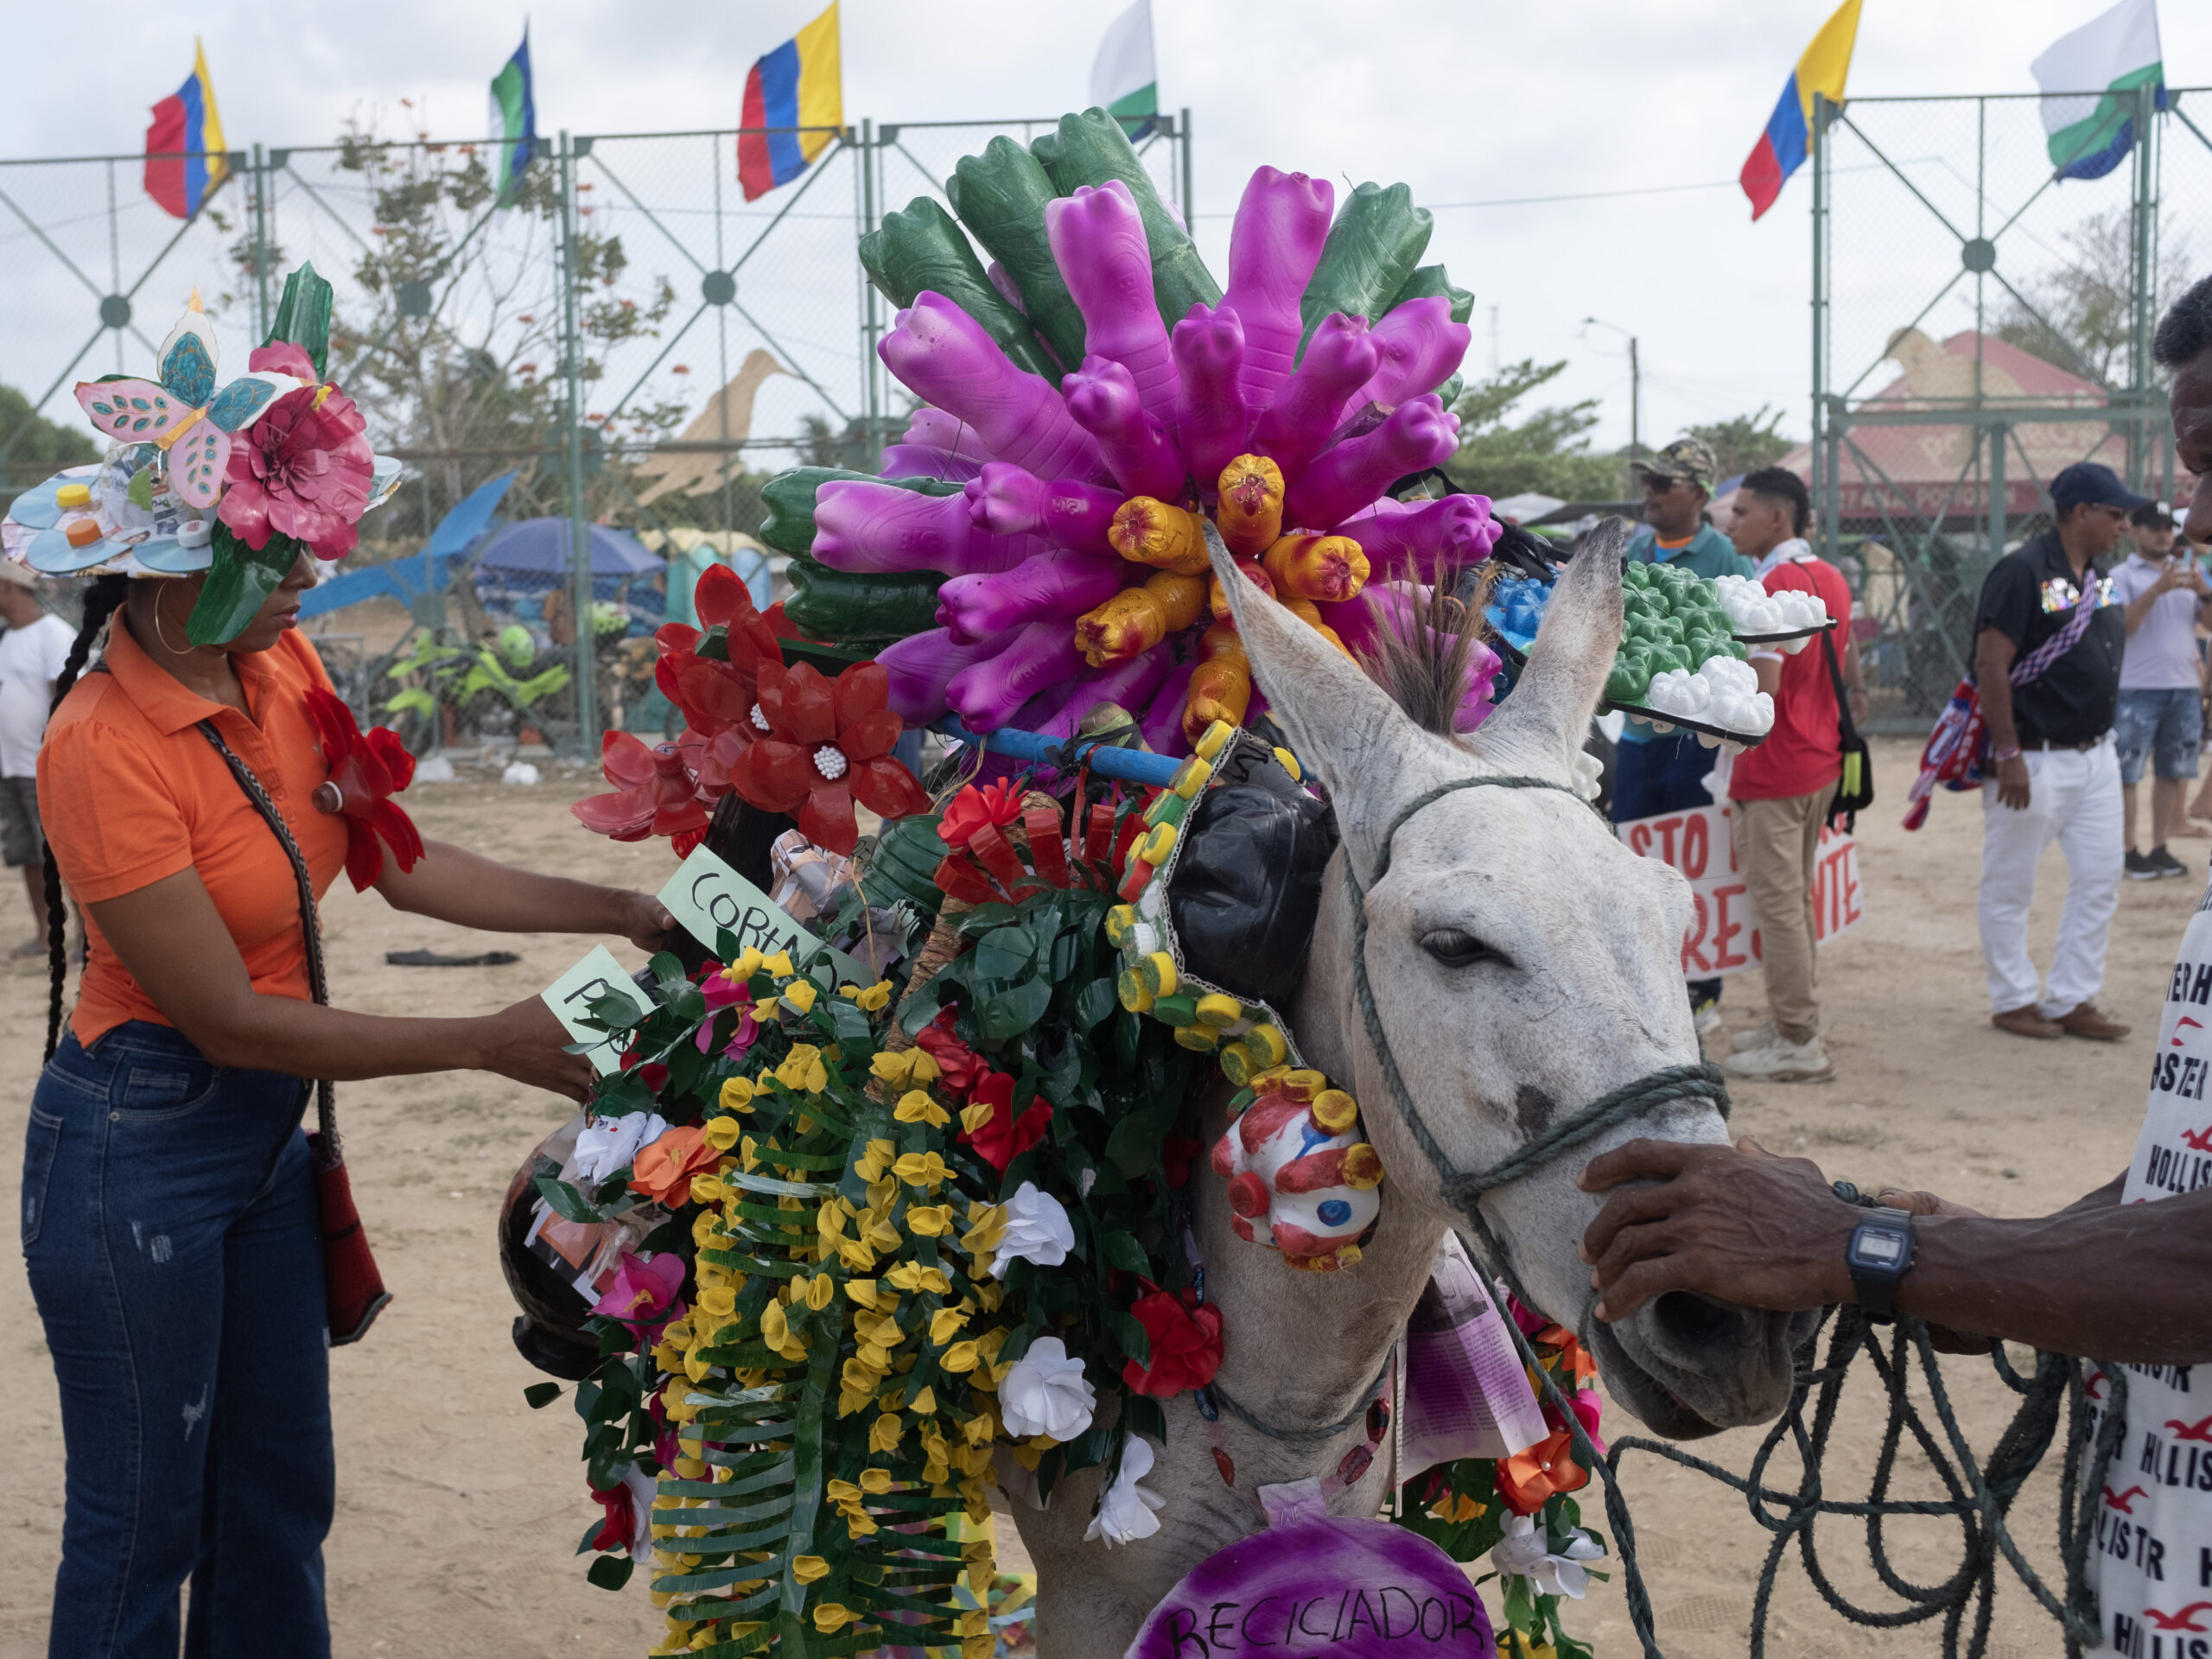 Donkeys take center stage at an annual festival in Colombia